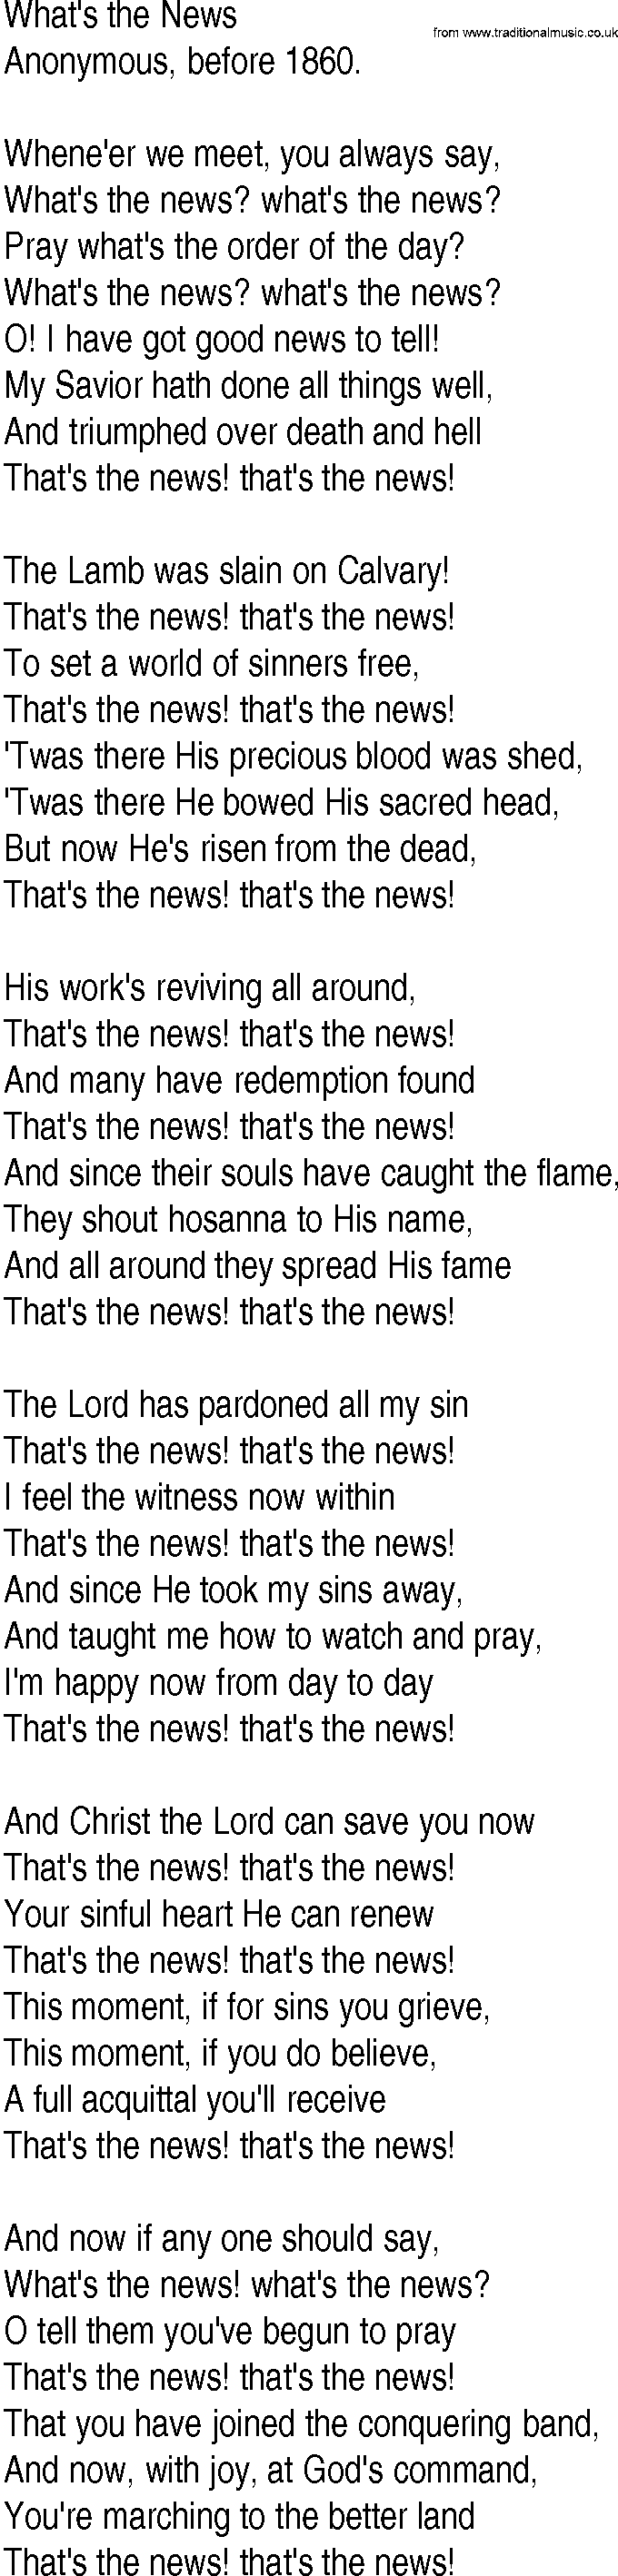 Hymn and Gospel Song: What's the News by Anonymous before lyrics